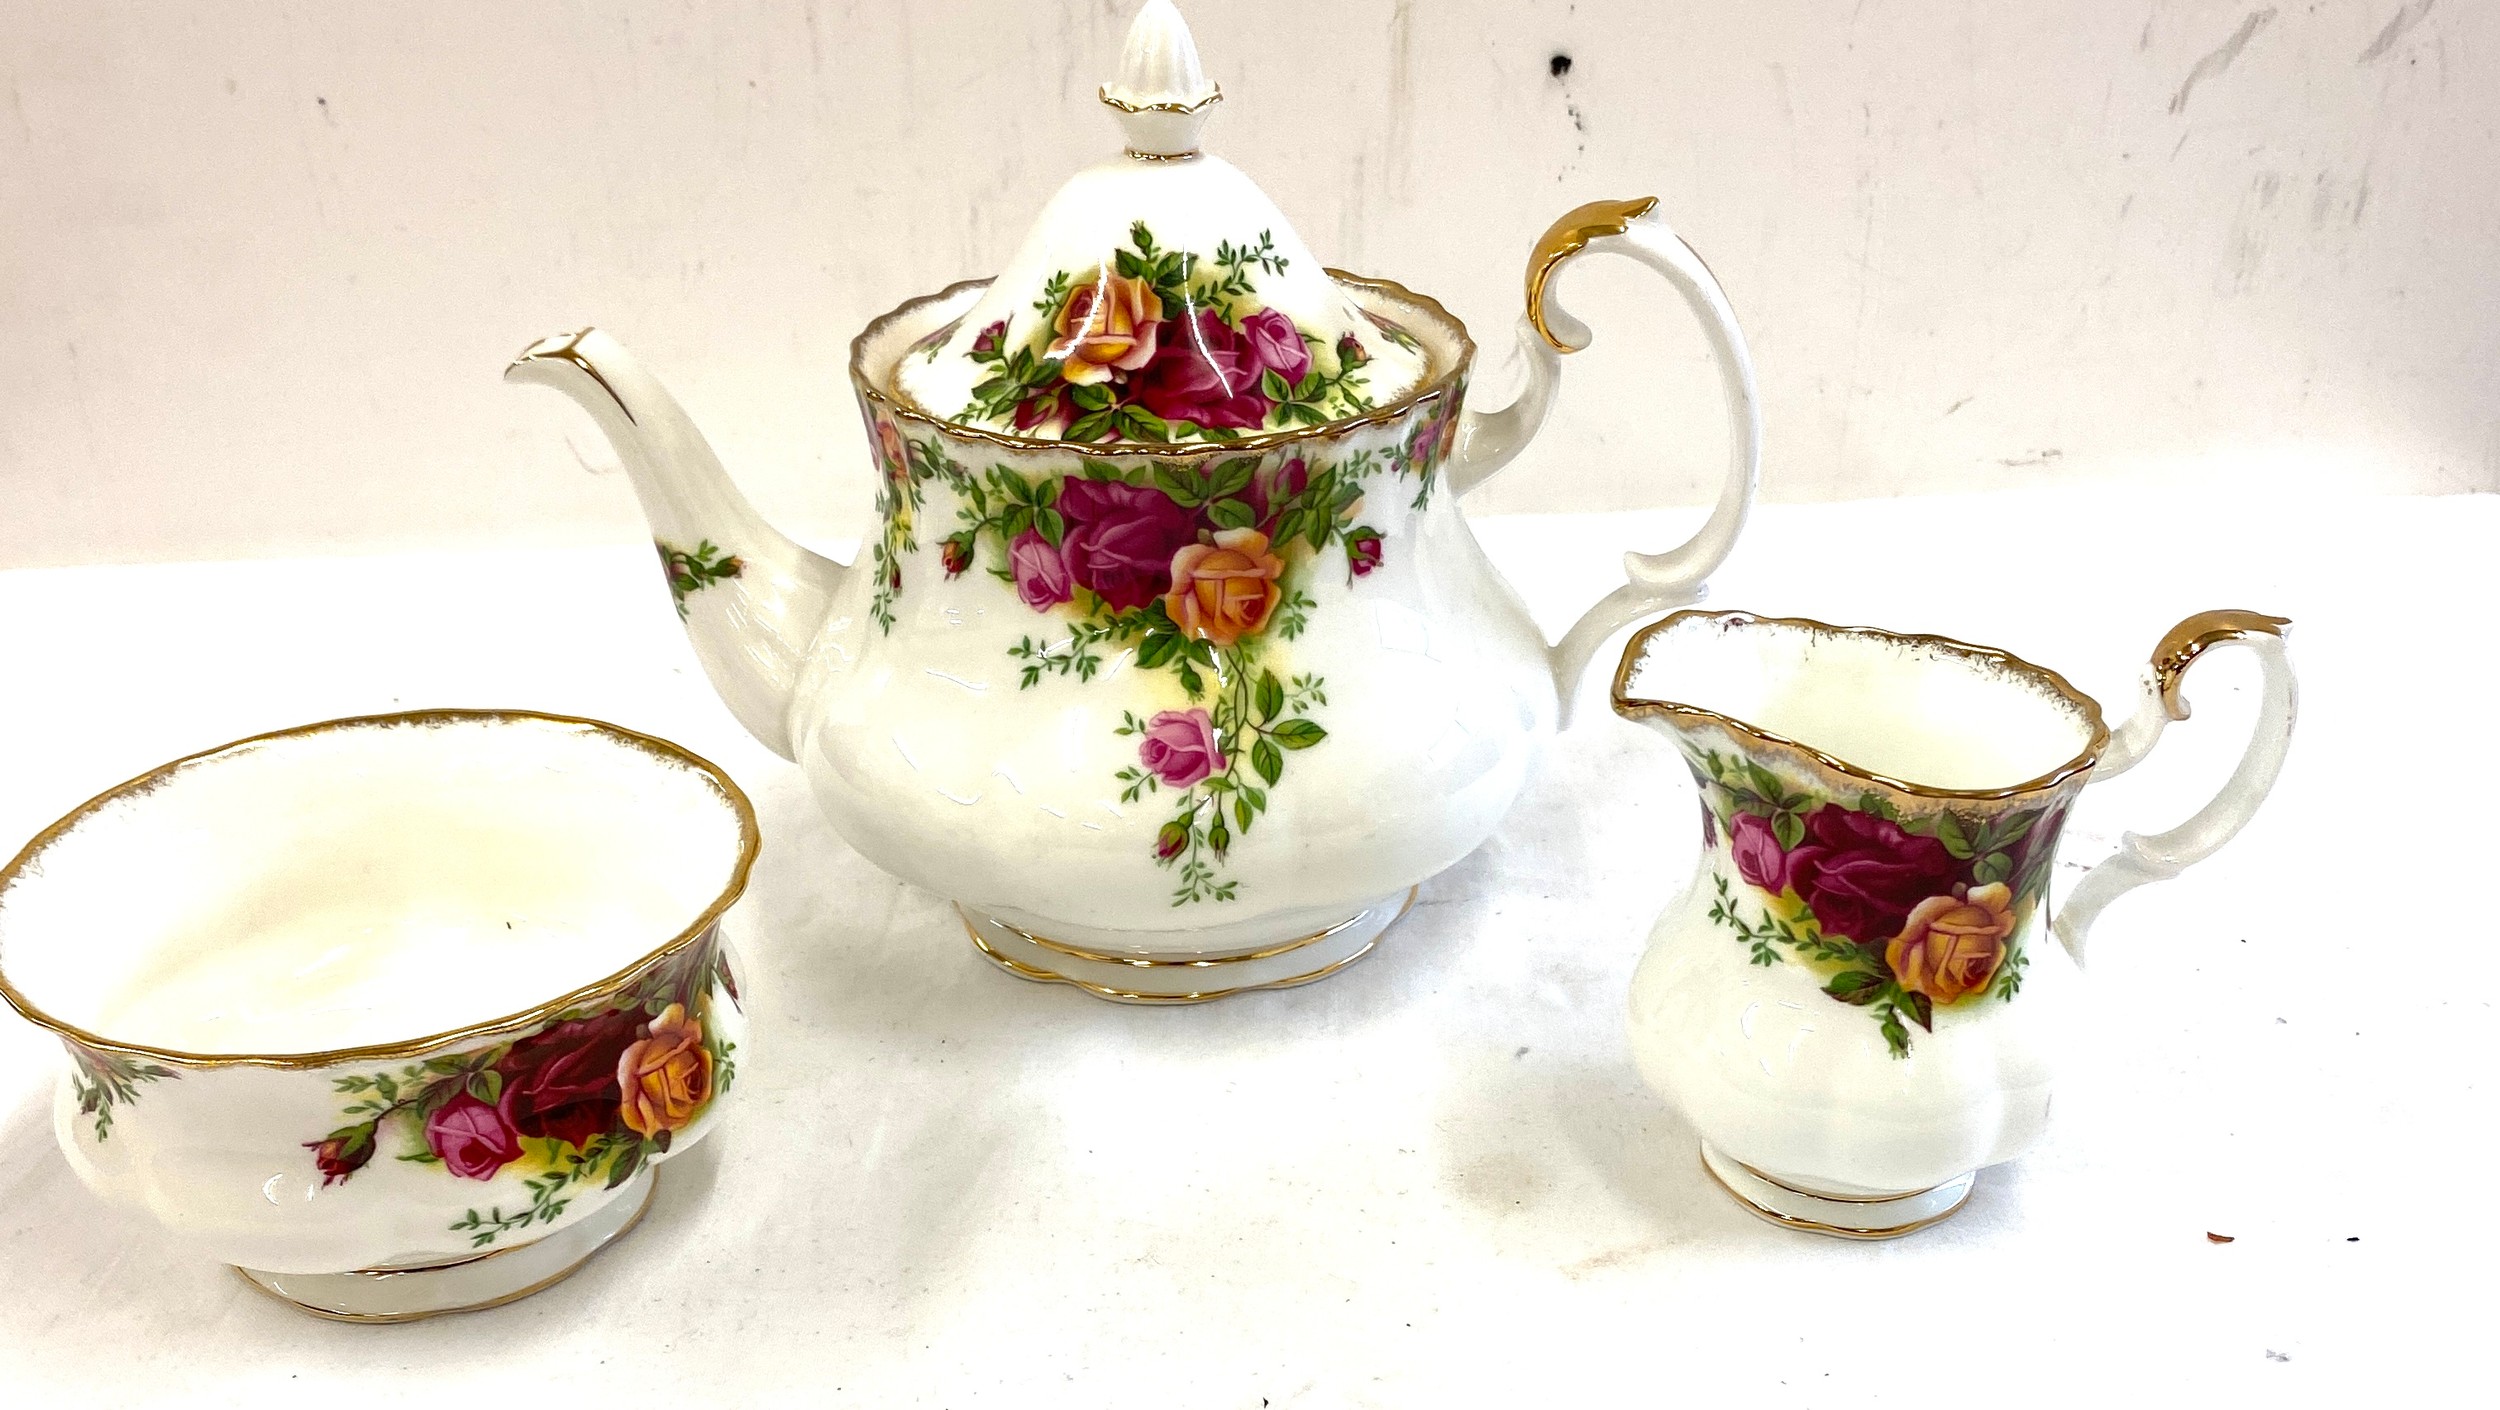 Royal Albert Old country rose teapot, jug and sugar bowl overall good condition small chip on tea